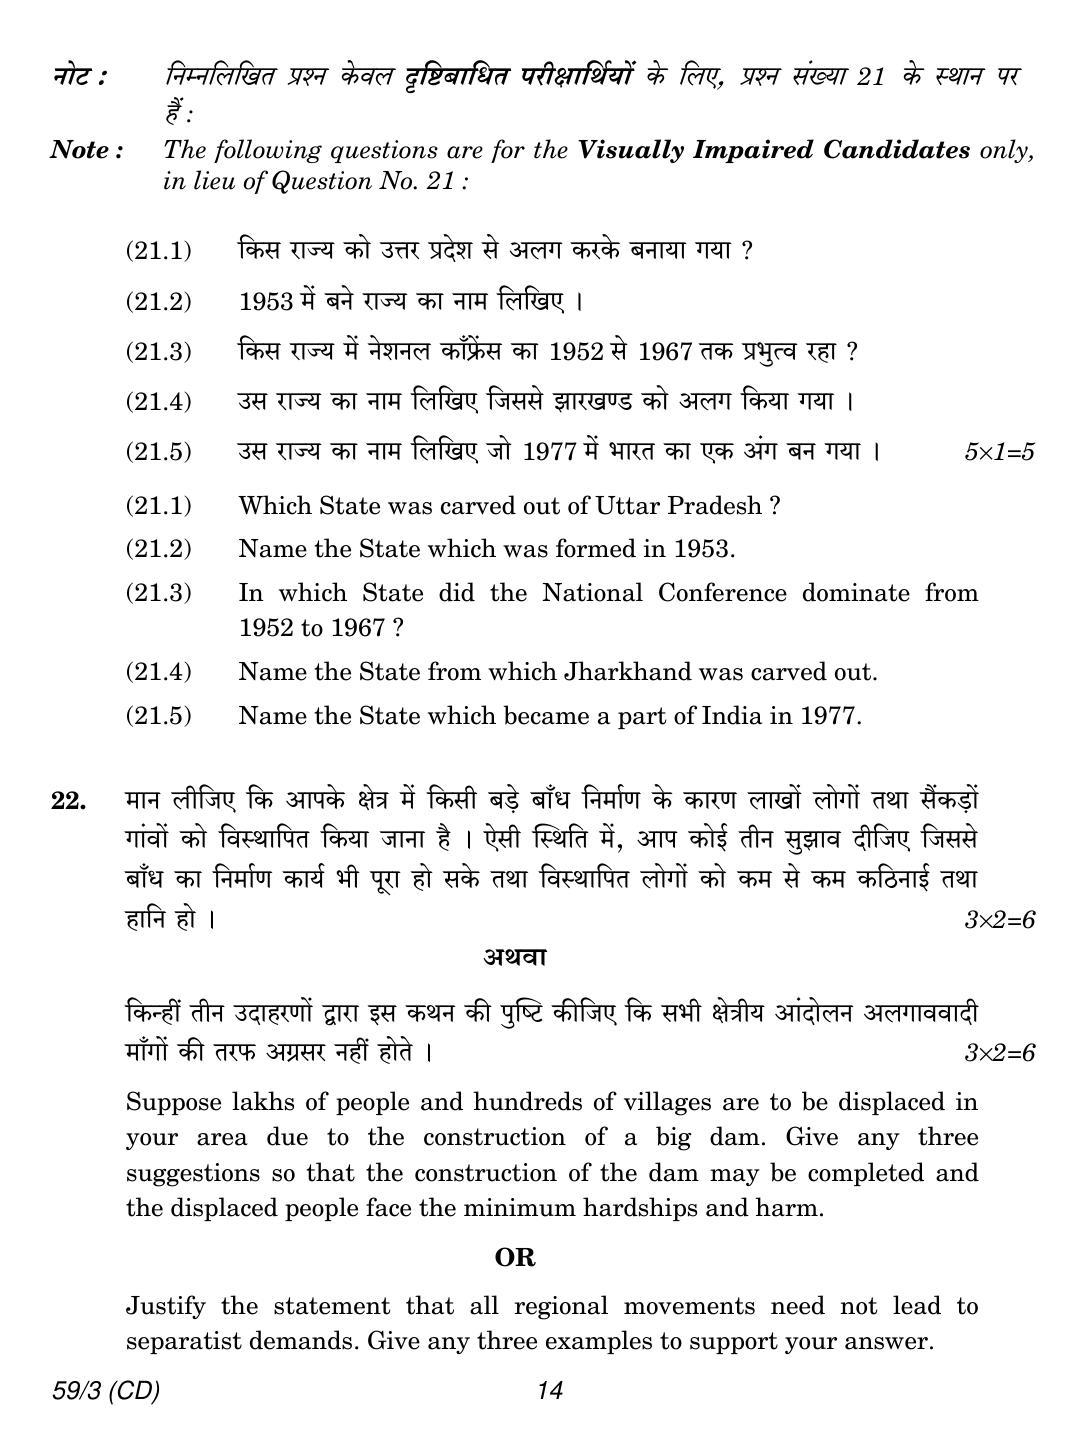 CBSE Class 12 59-3 POLITICAL SCIENCE CD 2018 Question Paper - Page 14